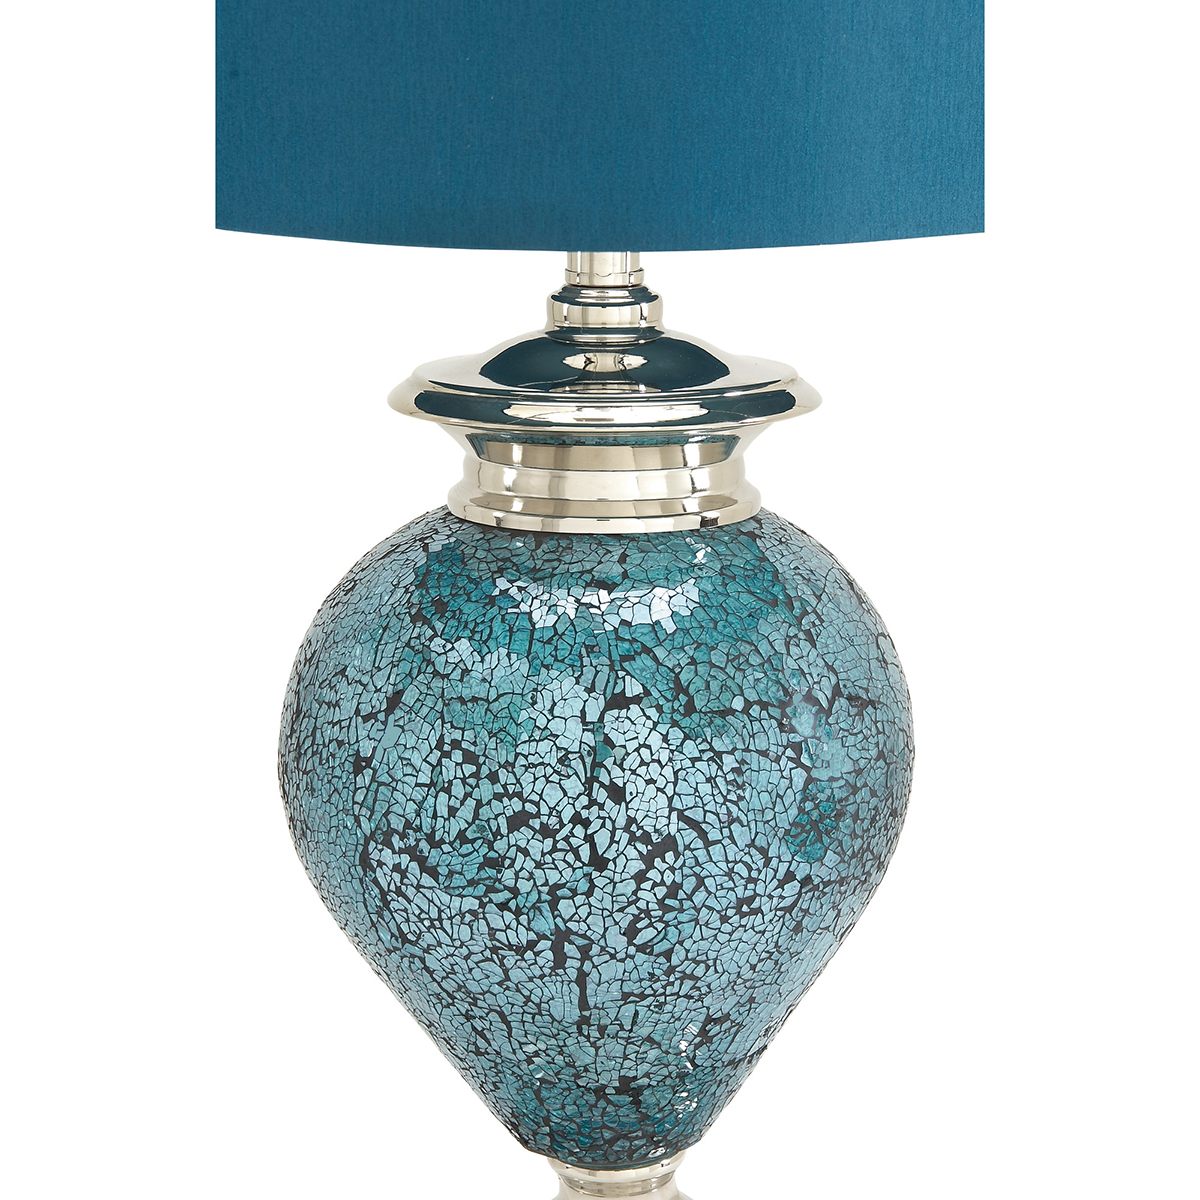 9th & Pike(R) Silver Glass Tuscan Table Lamp